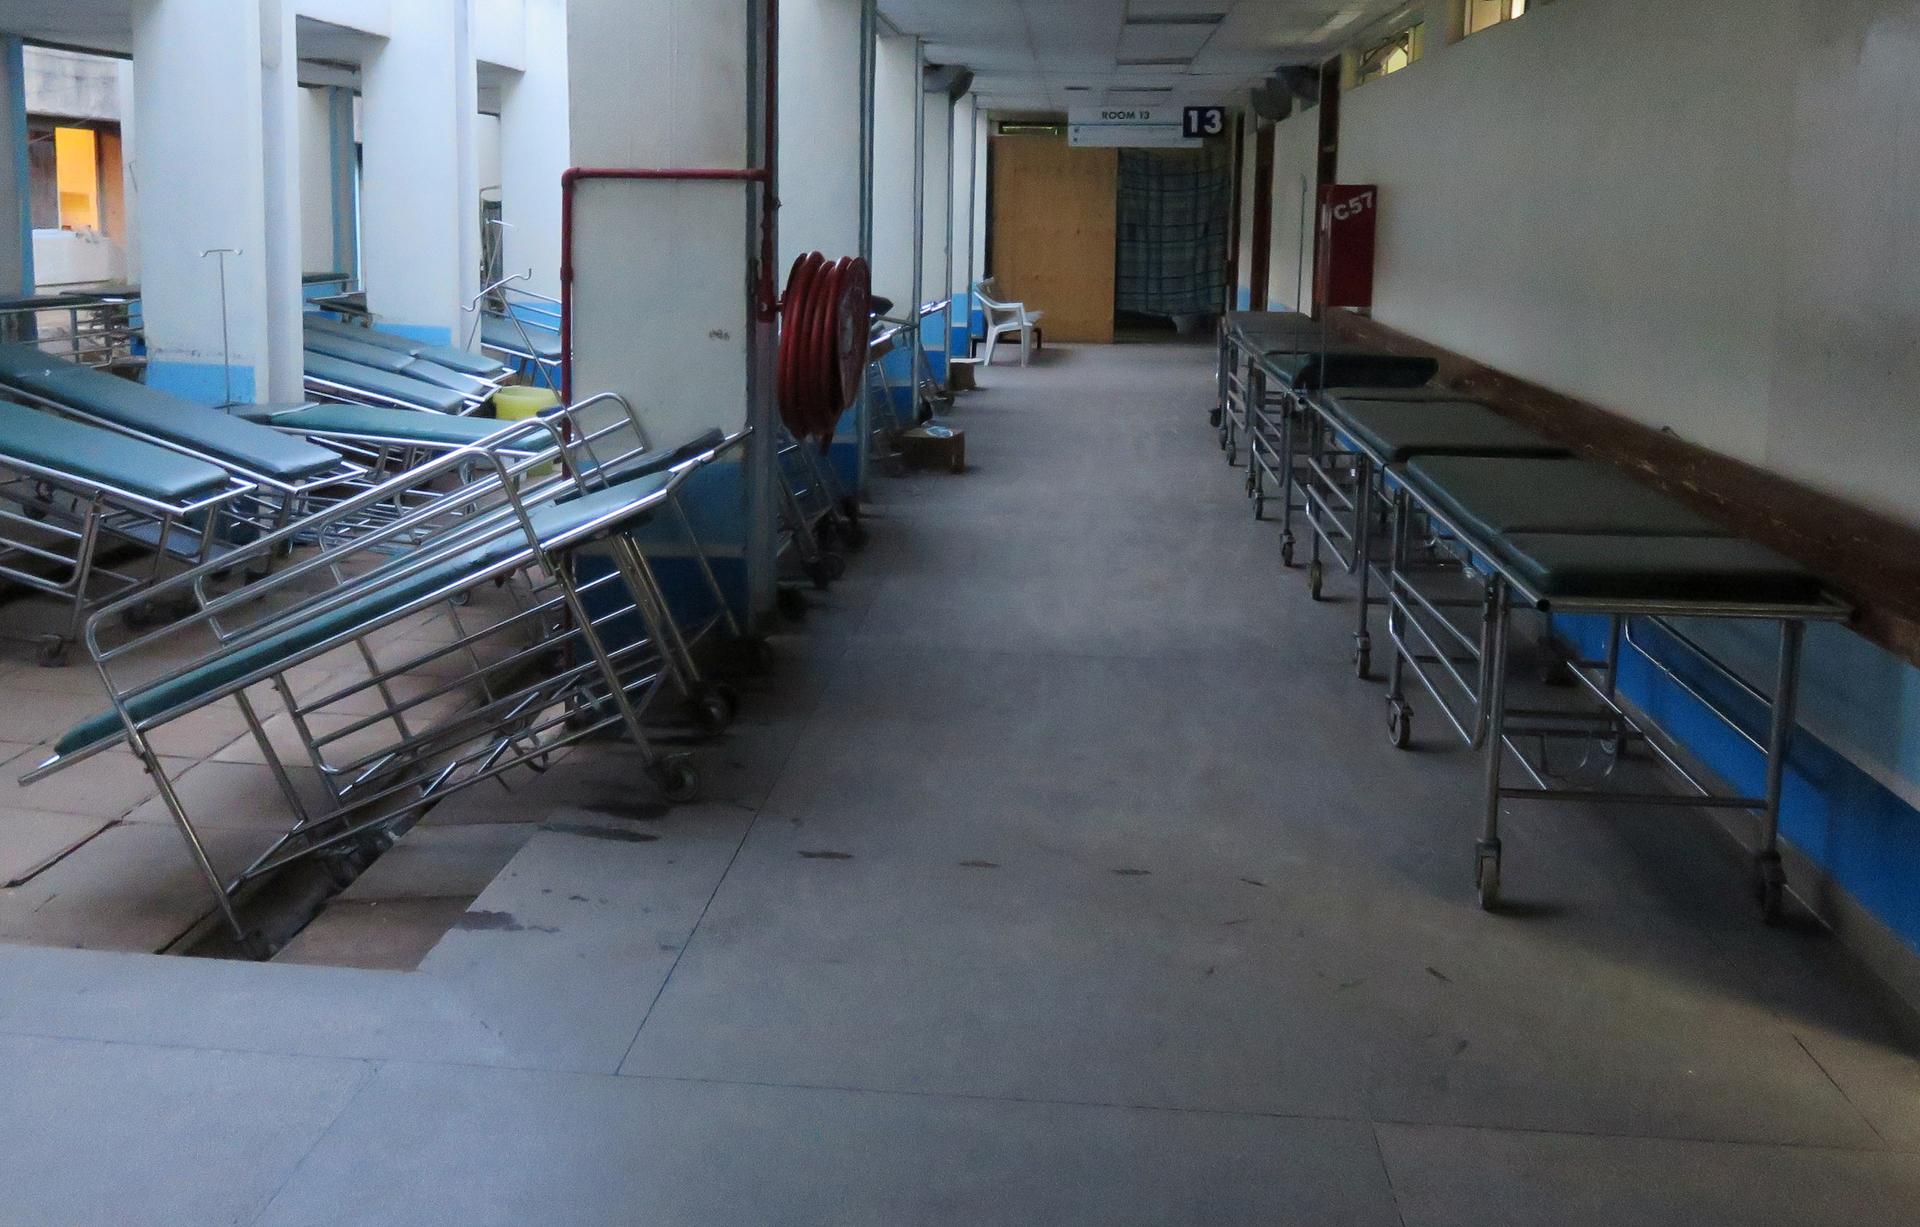 Medical stretchers are seen abandoned along the corridors at the main hospital during a strike